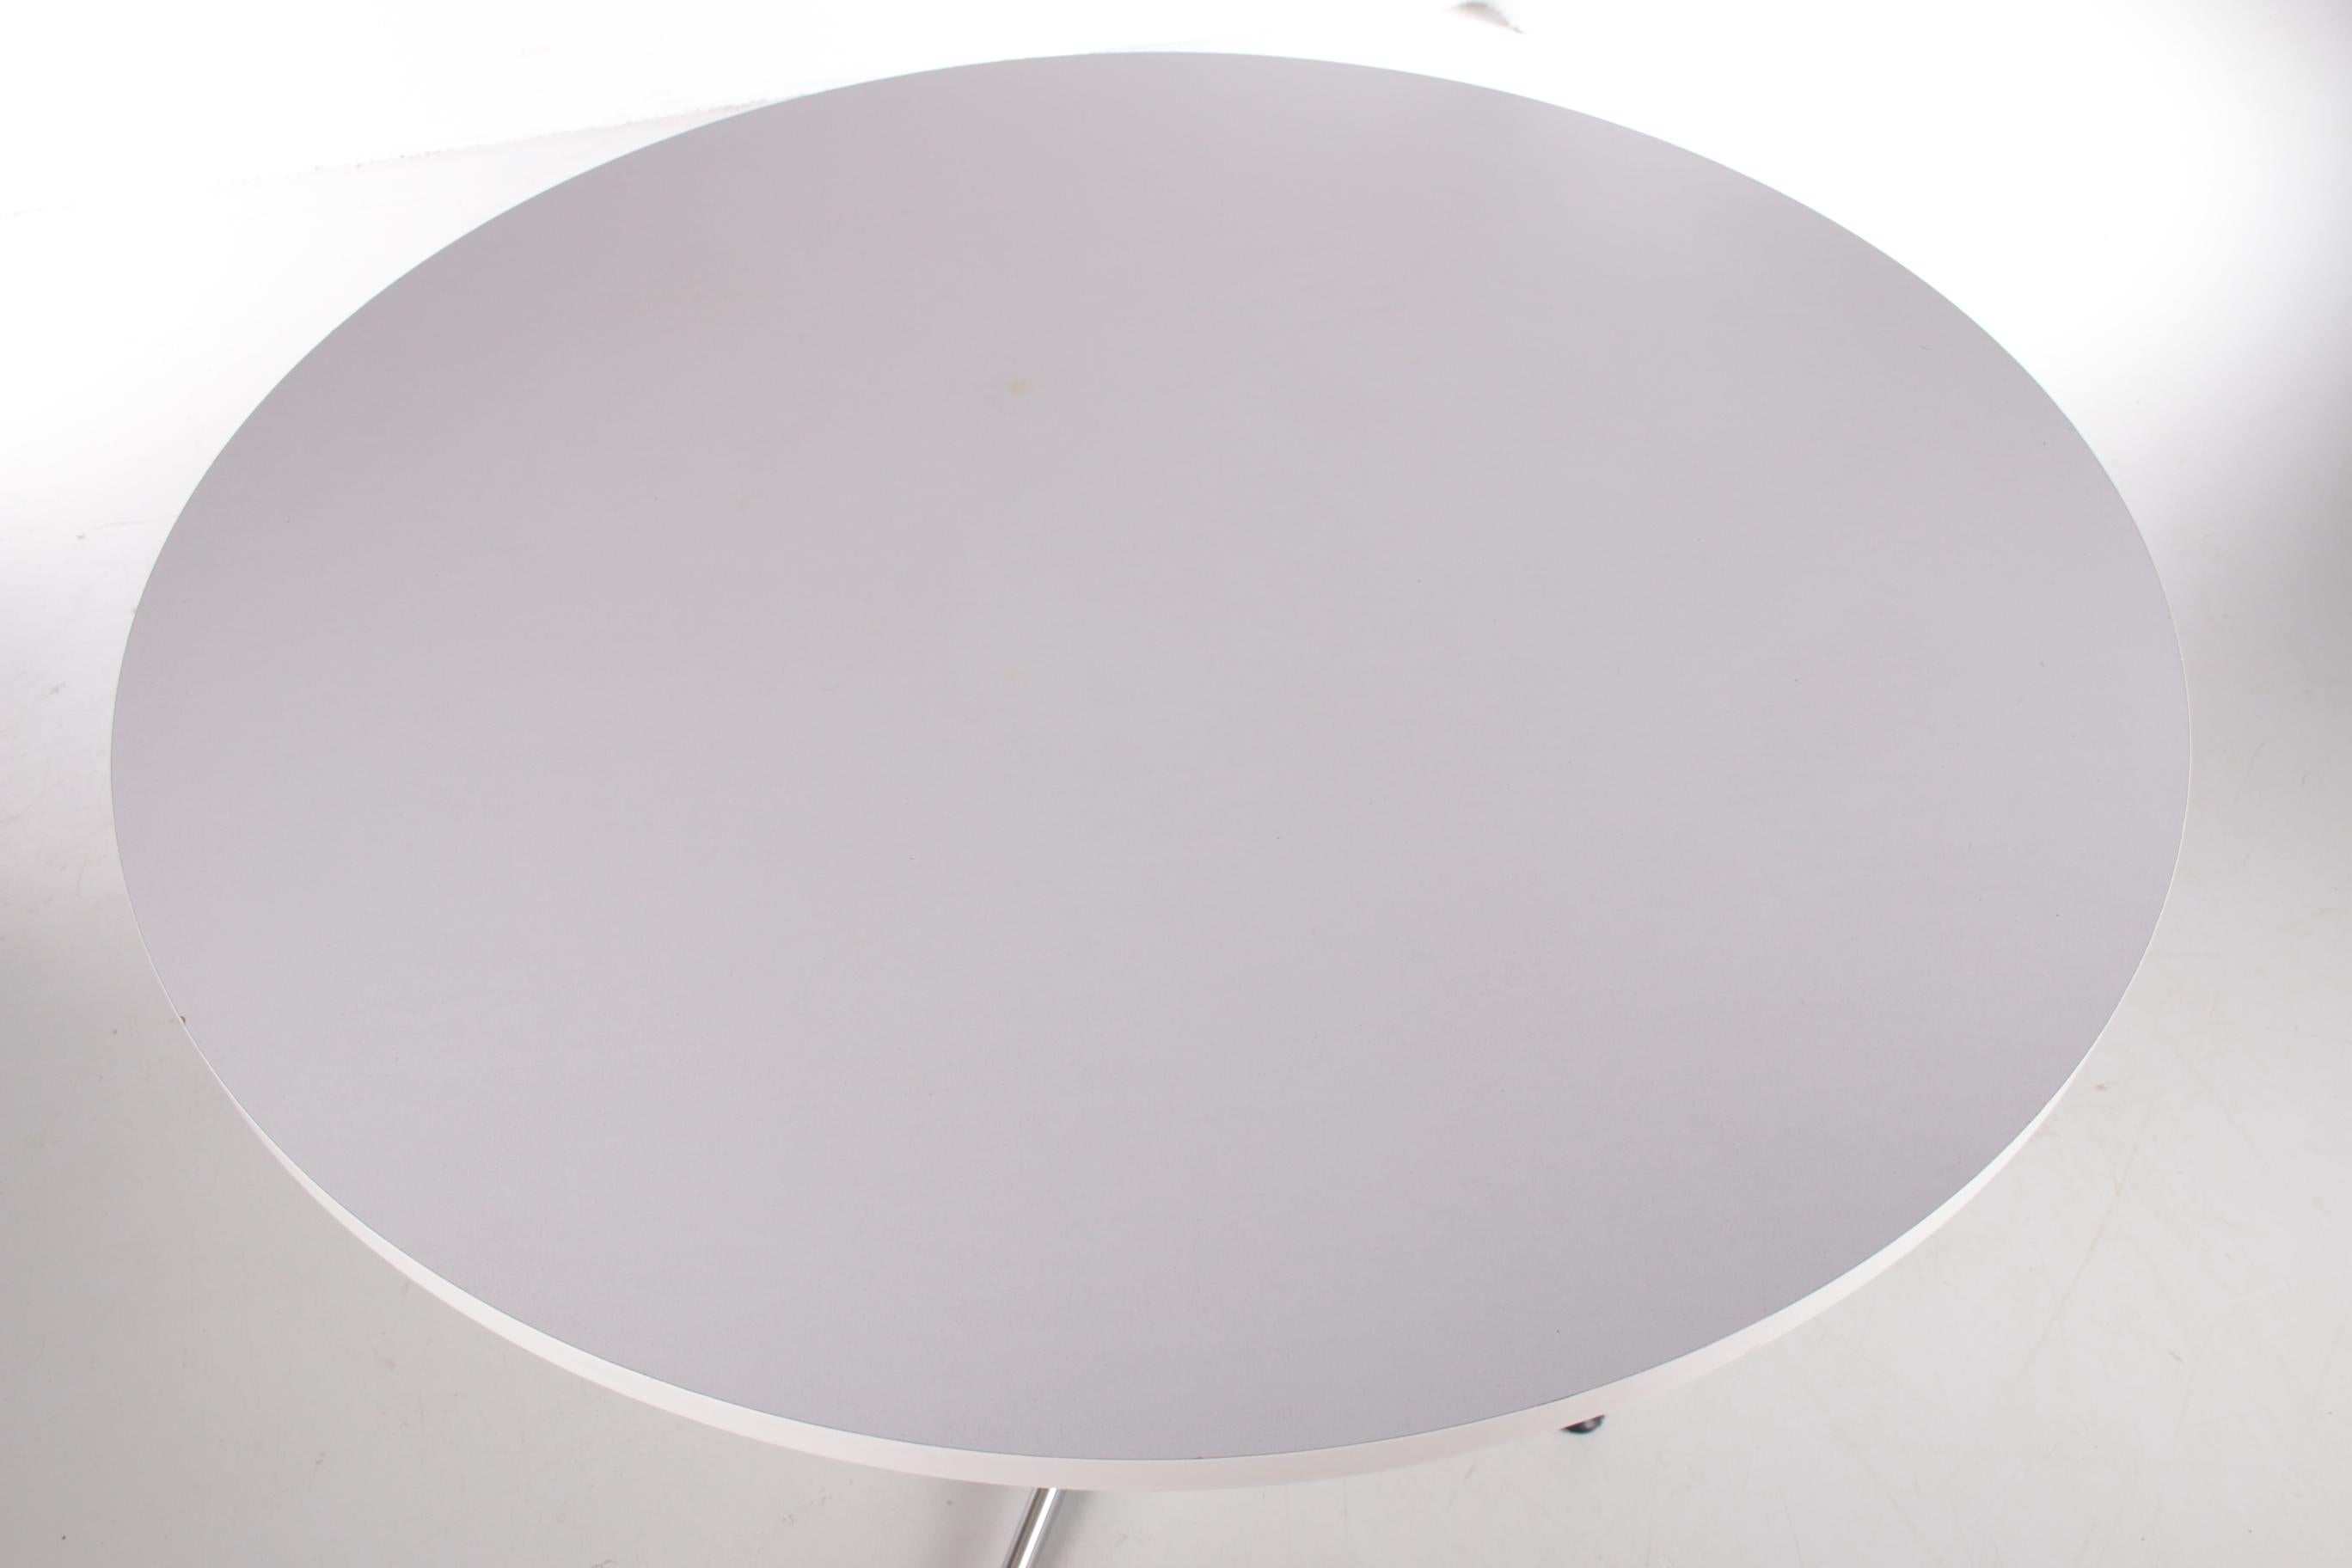 Beautiful round white dining table with chrome base, very similar to the Fritz Hansen model.

Vintage round dining table for 4 persons 1970s.

Round table top with white smooth melamine finish, chrome leg with star base.

Table is not